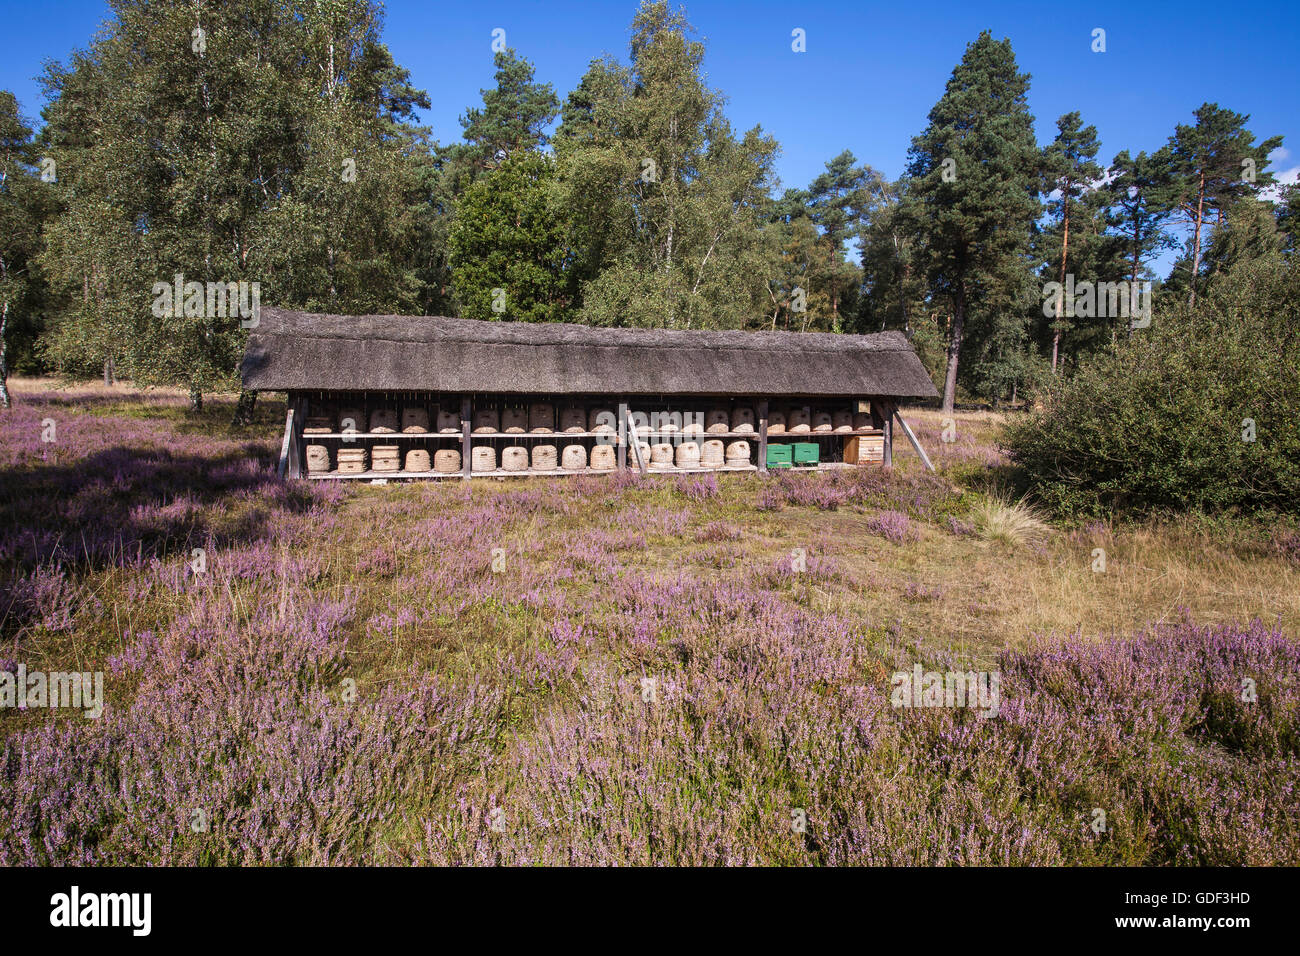 Bee Fence with bee hives, Lueneburg Heath Nature Reserve, in Undeloh, Lower Saxony, Germany Stock Photo